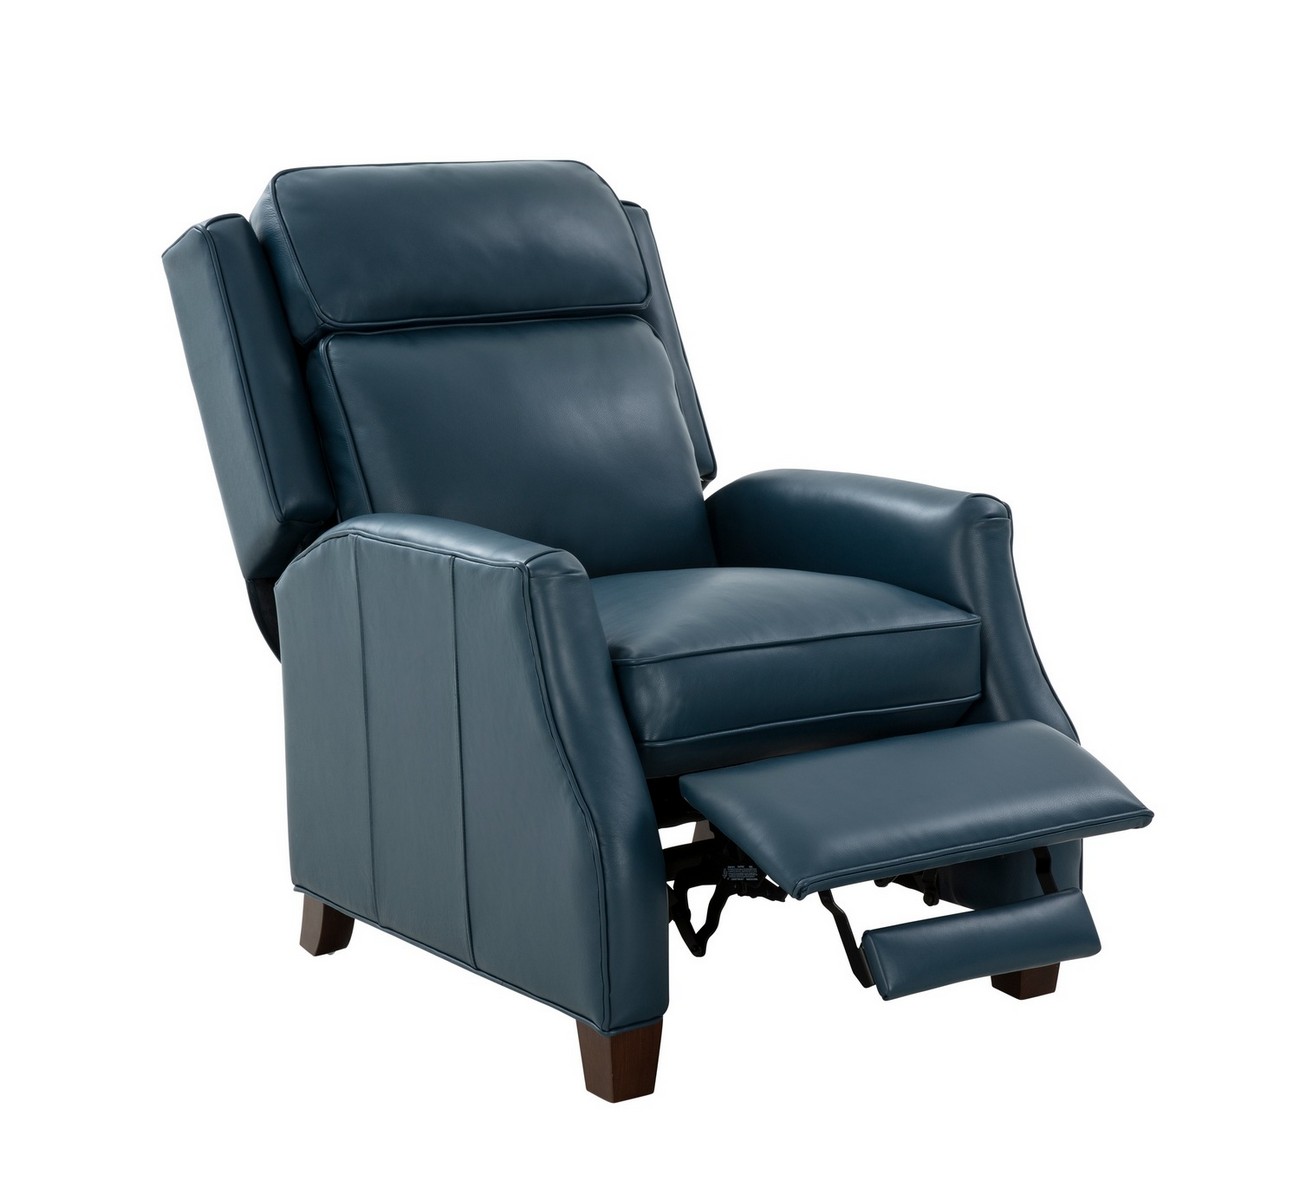 Barcalounger Nixon Recliner Chair - Prestin Yale Blue/All Leather